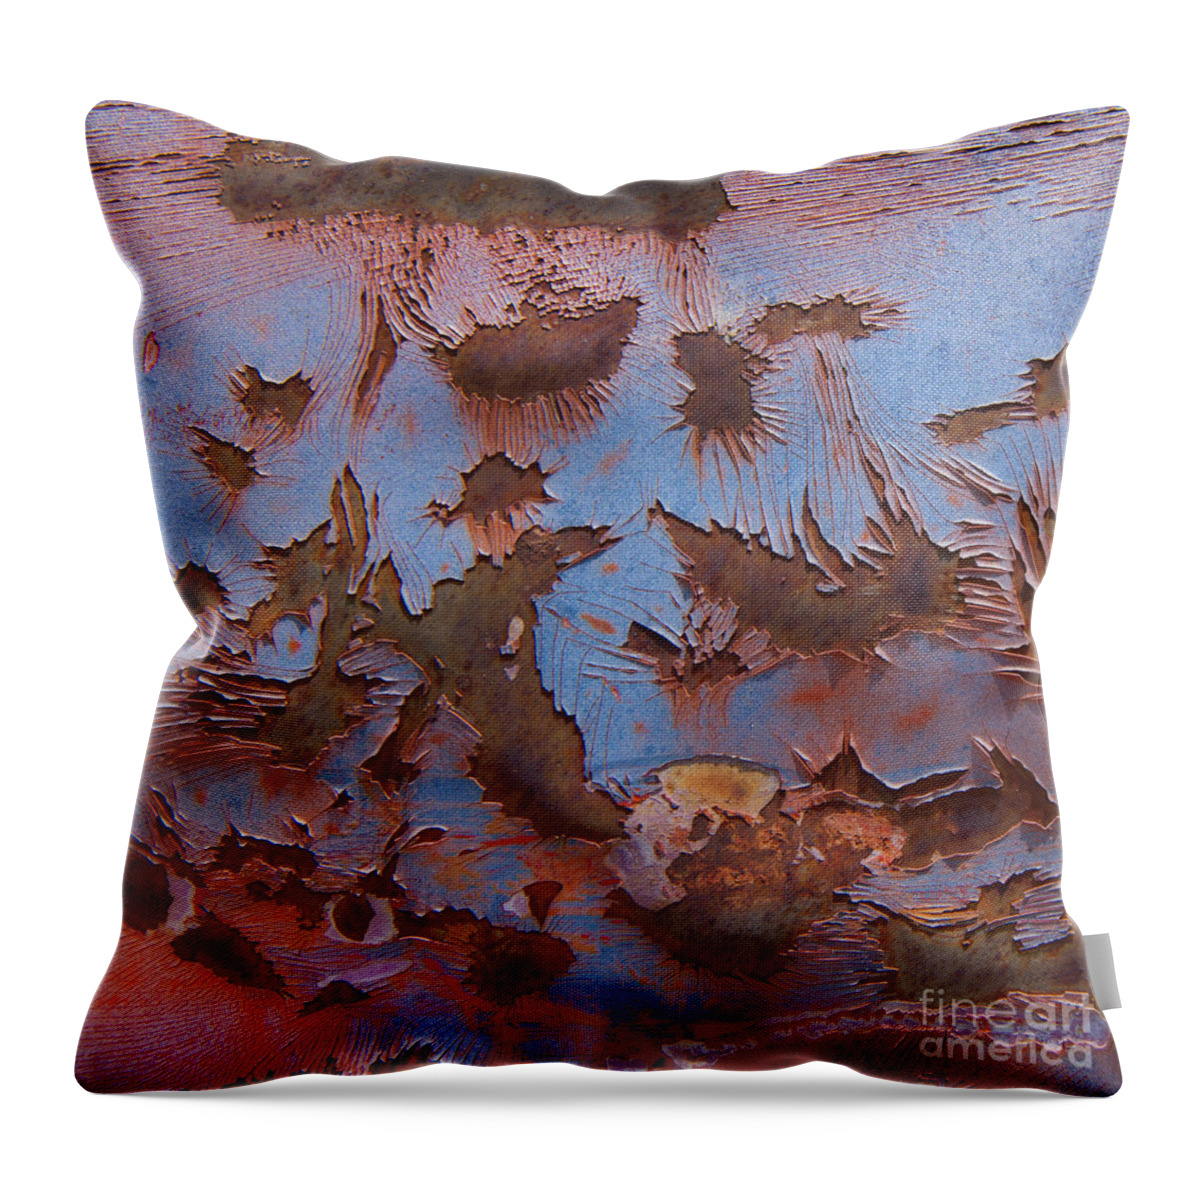 Abstract Throw Pillow featuring the photograph More Painted Desert Abstract Square. by Lee Craig